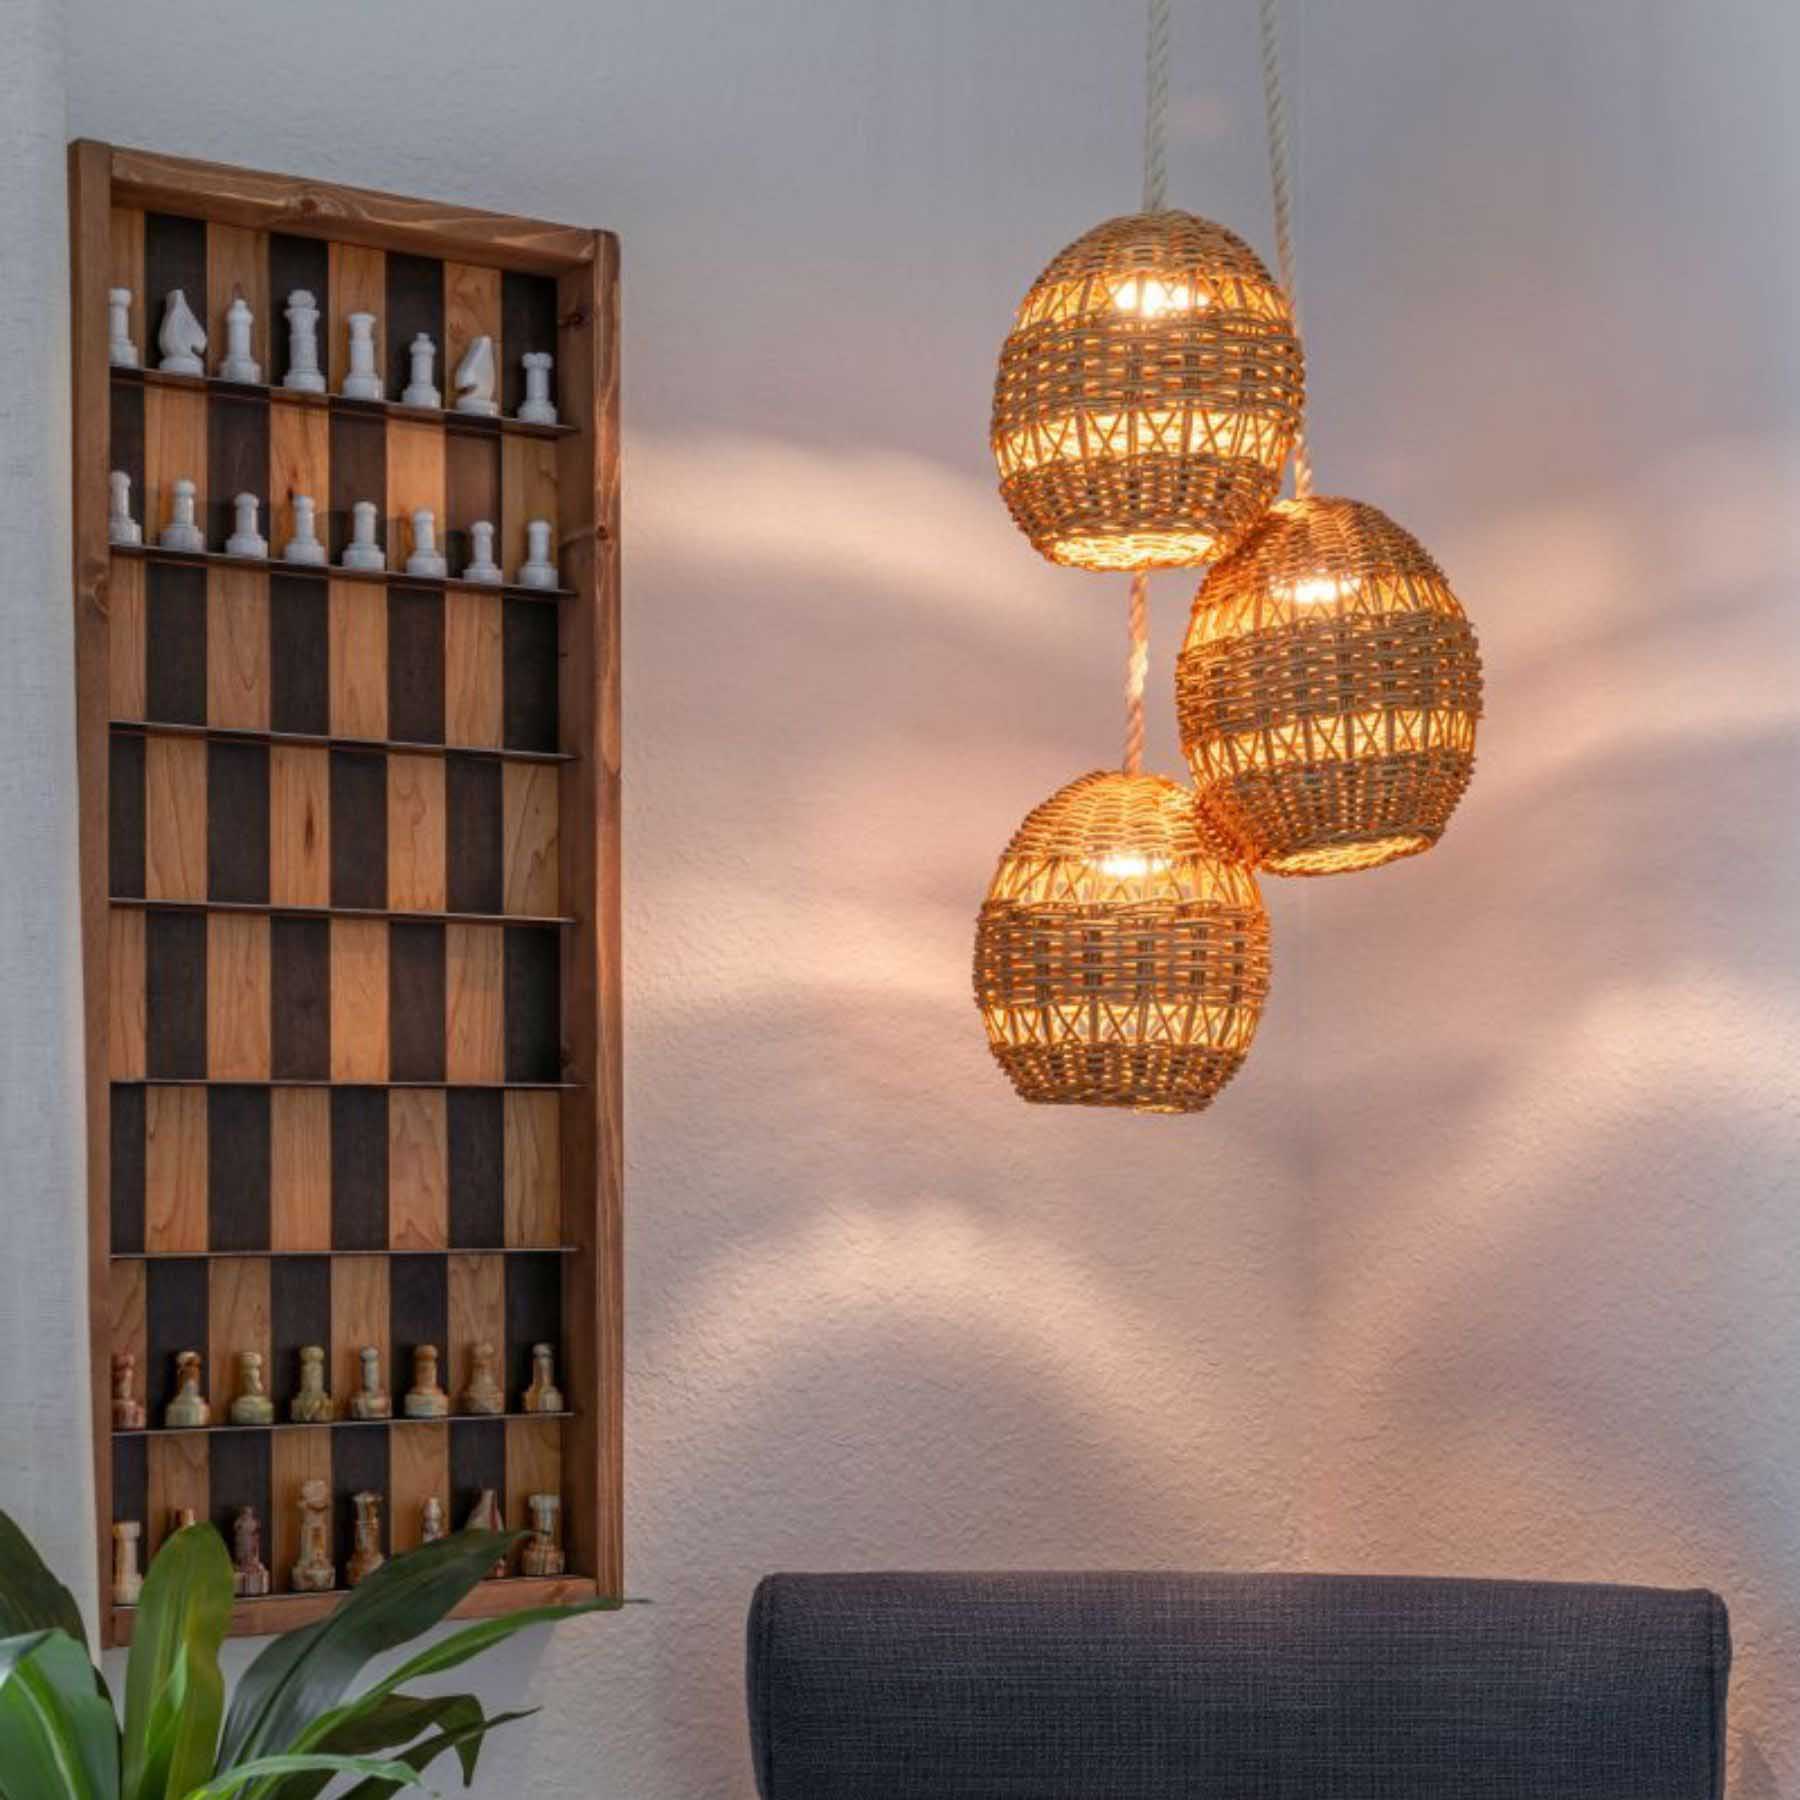 these pendant lights can be arranged in combinations of 2 or 3 forming a decorative cluster